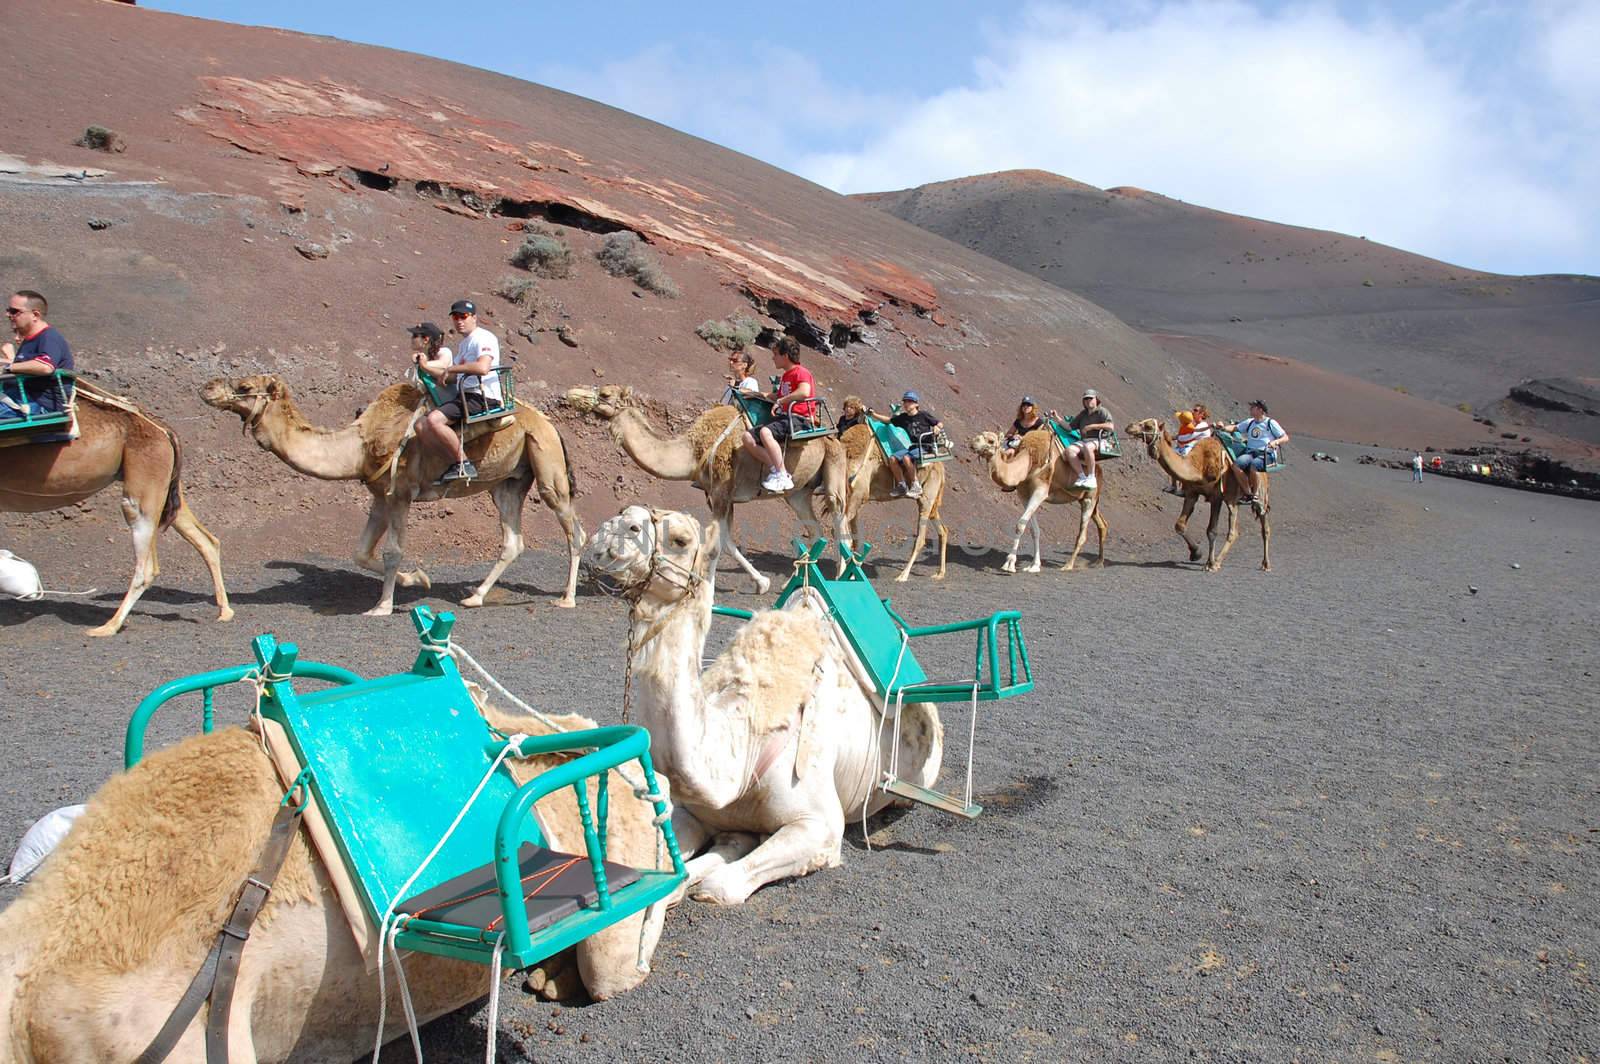 TIMANFAYA NATIONAL PARK, LANZAROTE, SPAIN - JUNE 10: Tourists riding on camels being guided by local people through the famous Timanfaya National Park in June 10, 2009